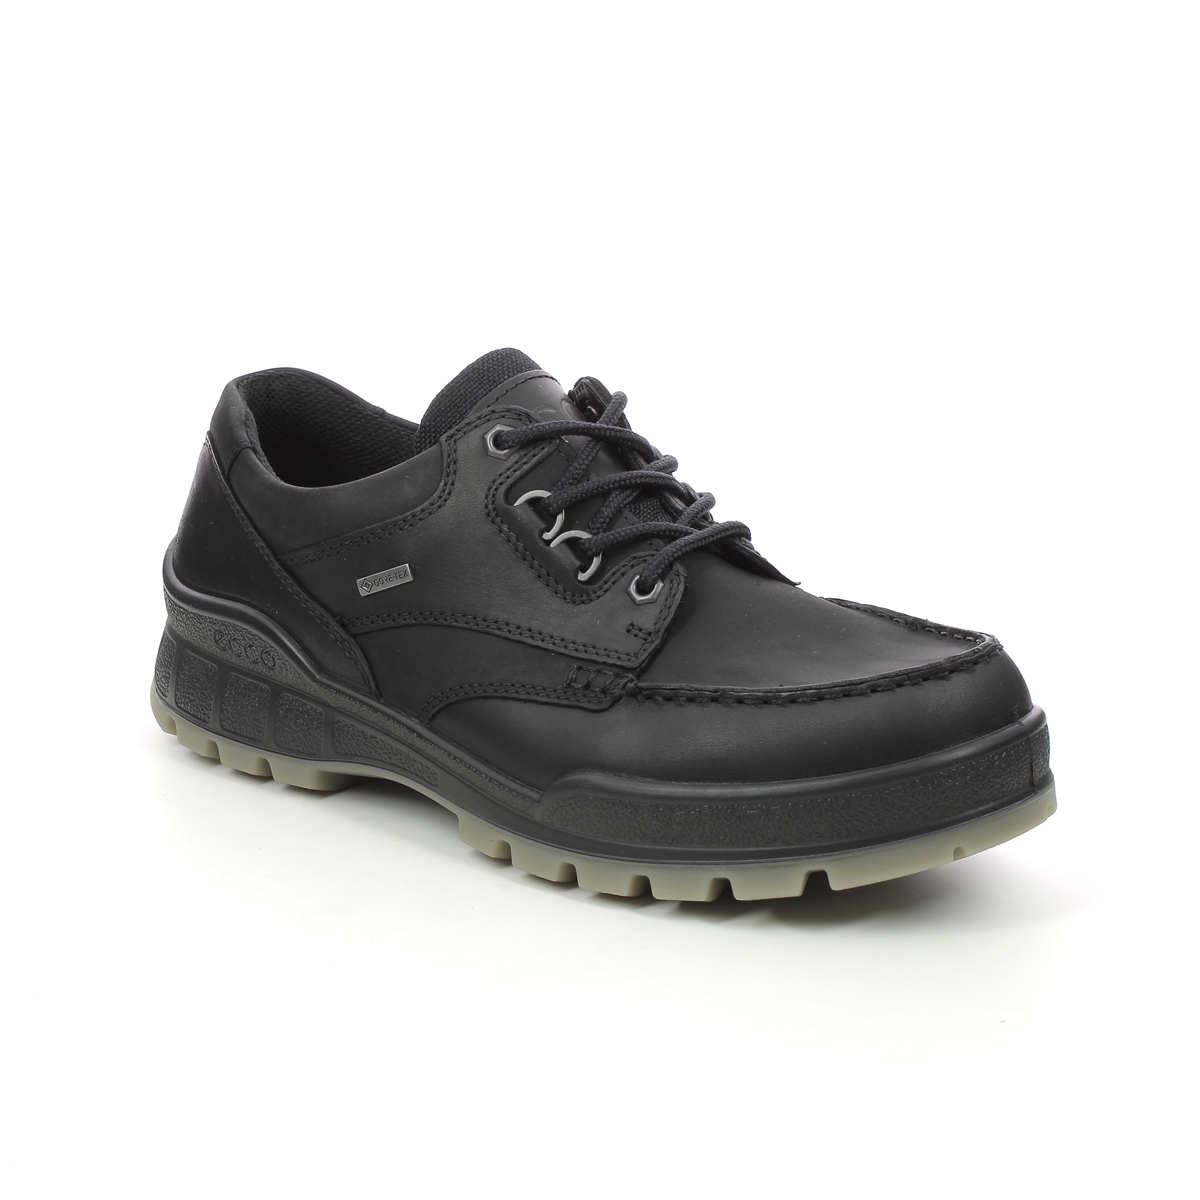 Track 25 Tex Shoes in Black Leather 831714-51052